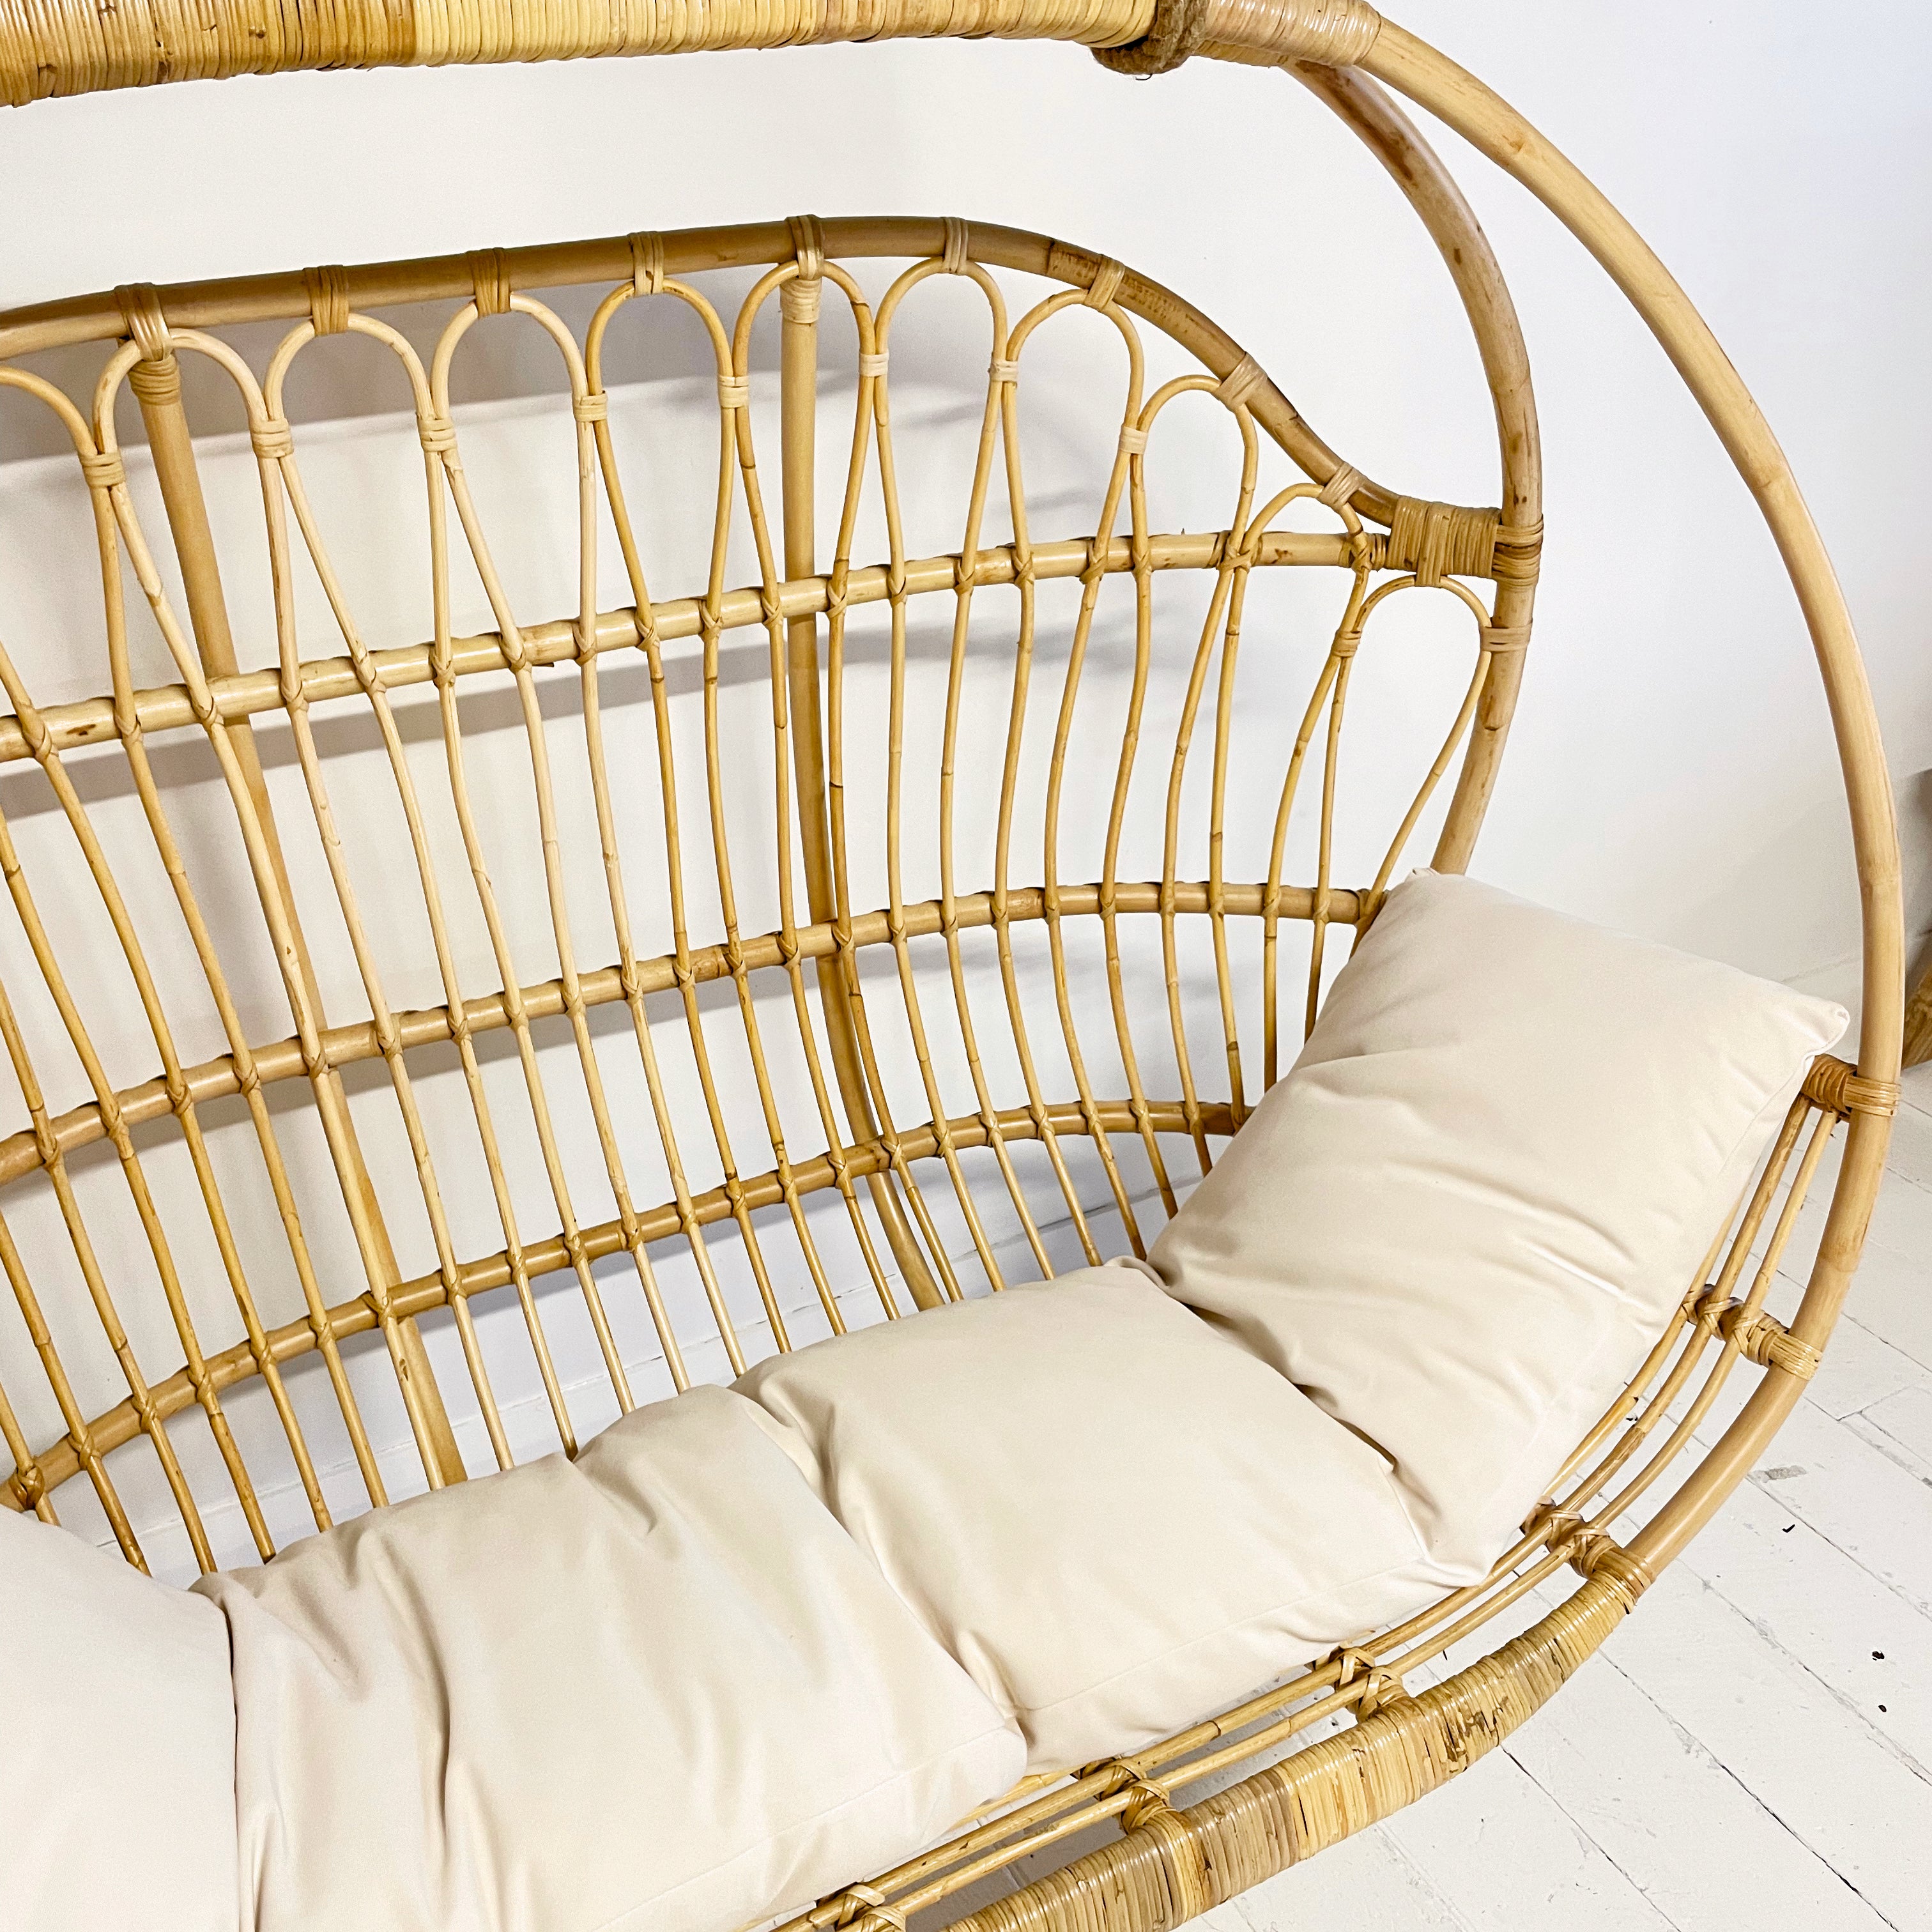 Natural Round Double Cane Hanging Chair